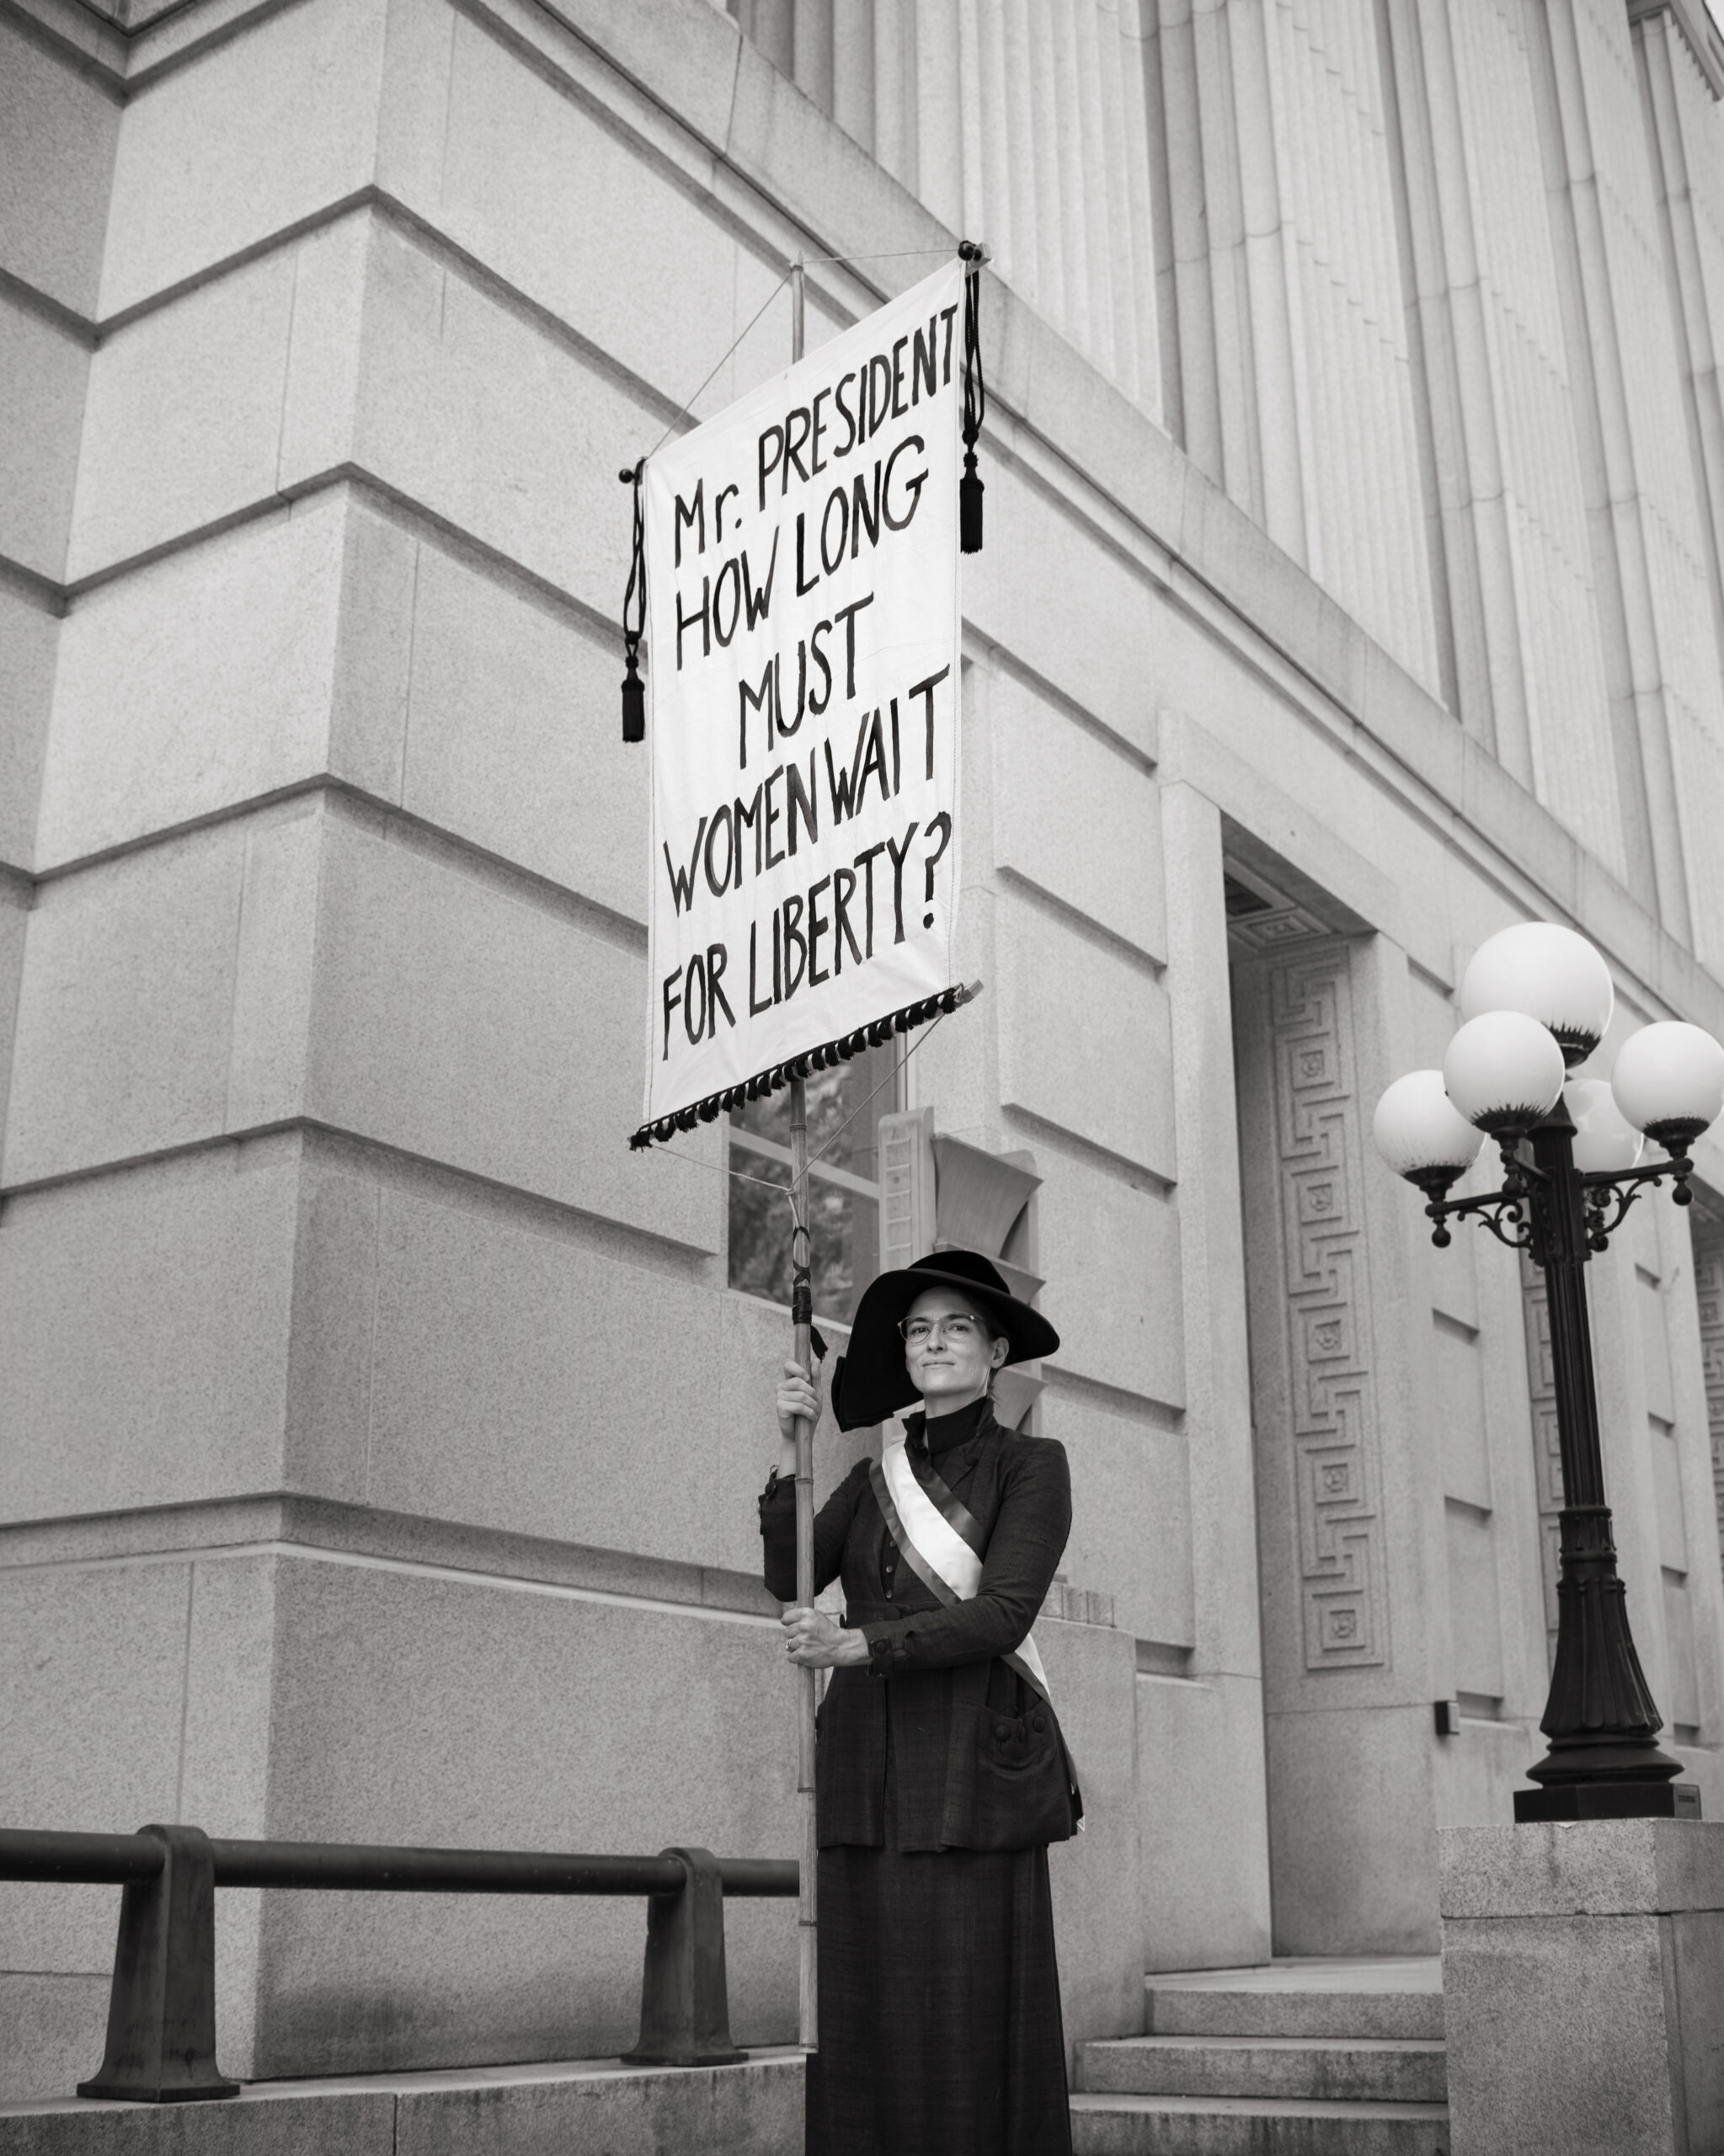 black and white photo of a suffragette holding a sign that says "mr president how long must we wait for liberty?"